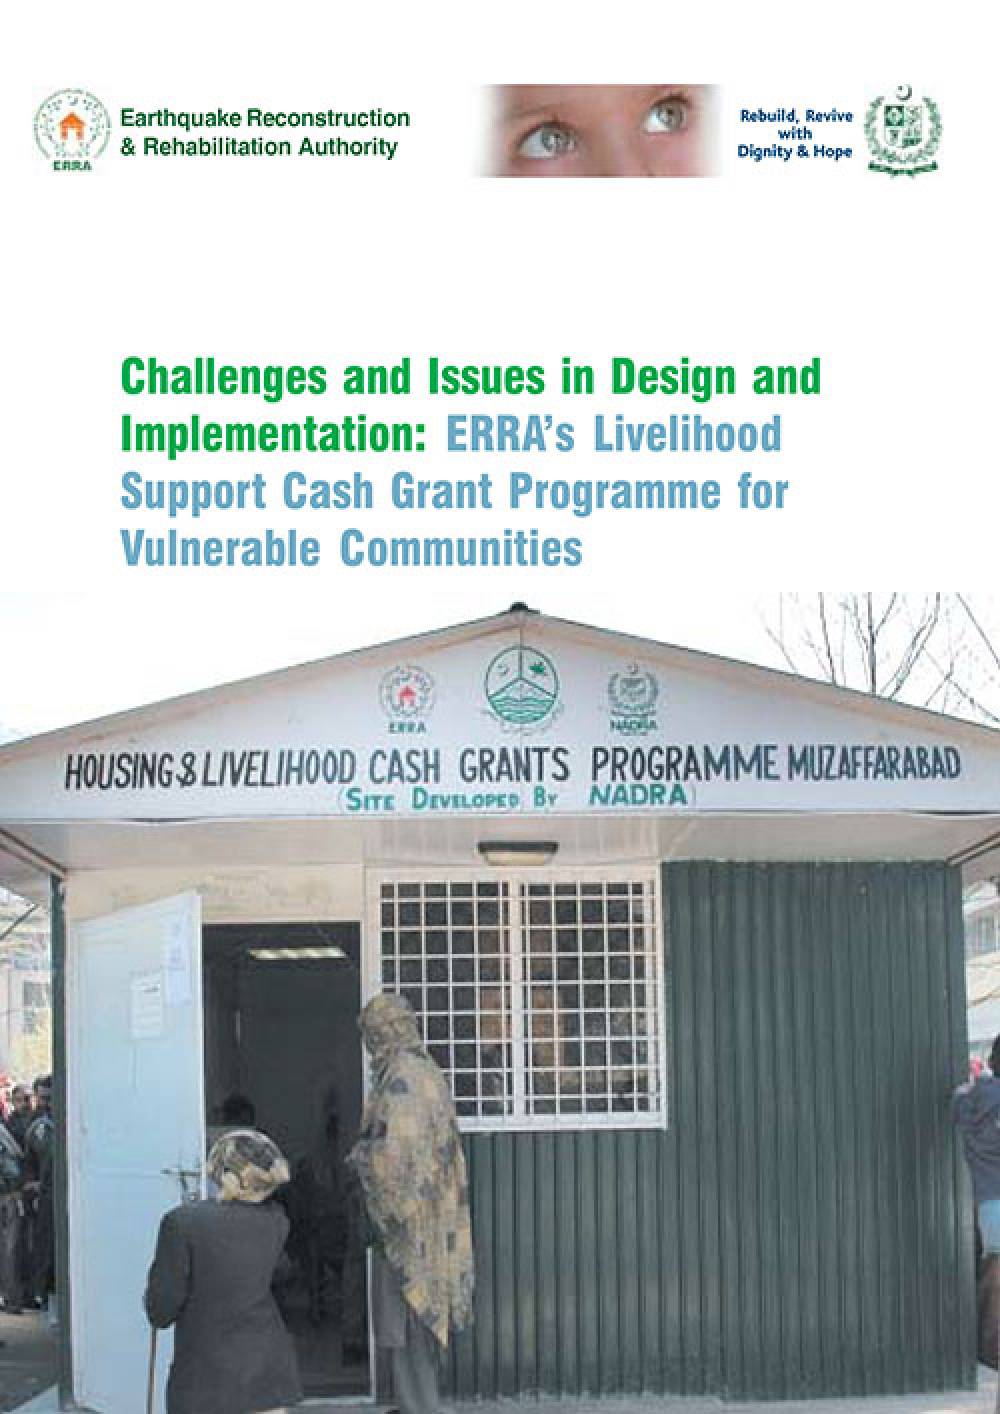 Challenges and Issues in Design and Implementation ERRA's Livelihood Support Cash Grant Programme for Vulnerable Communities